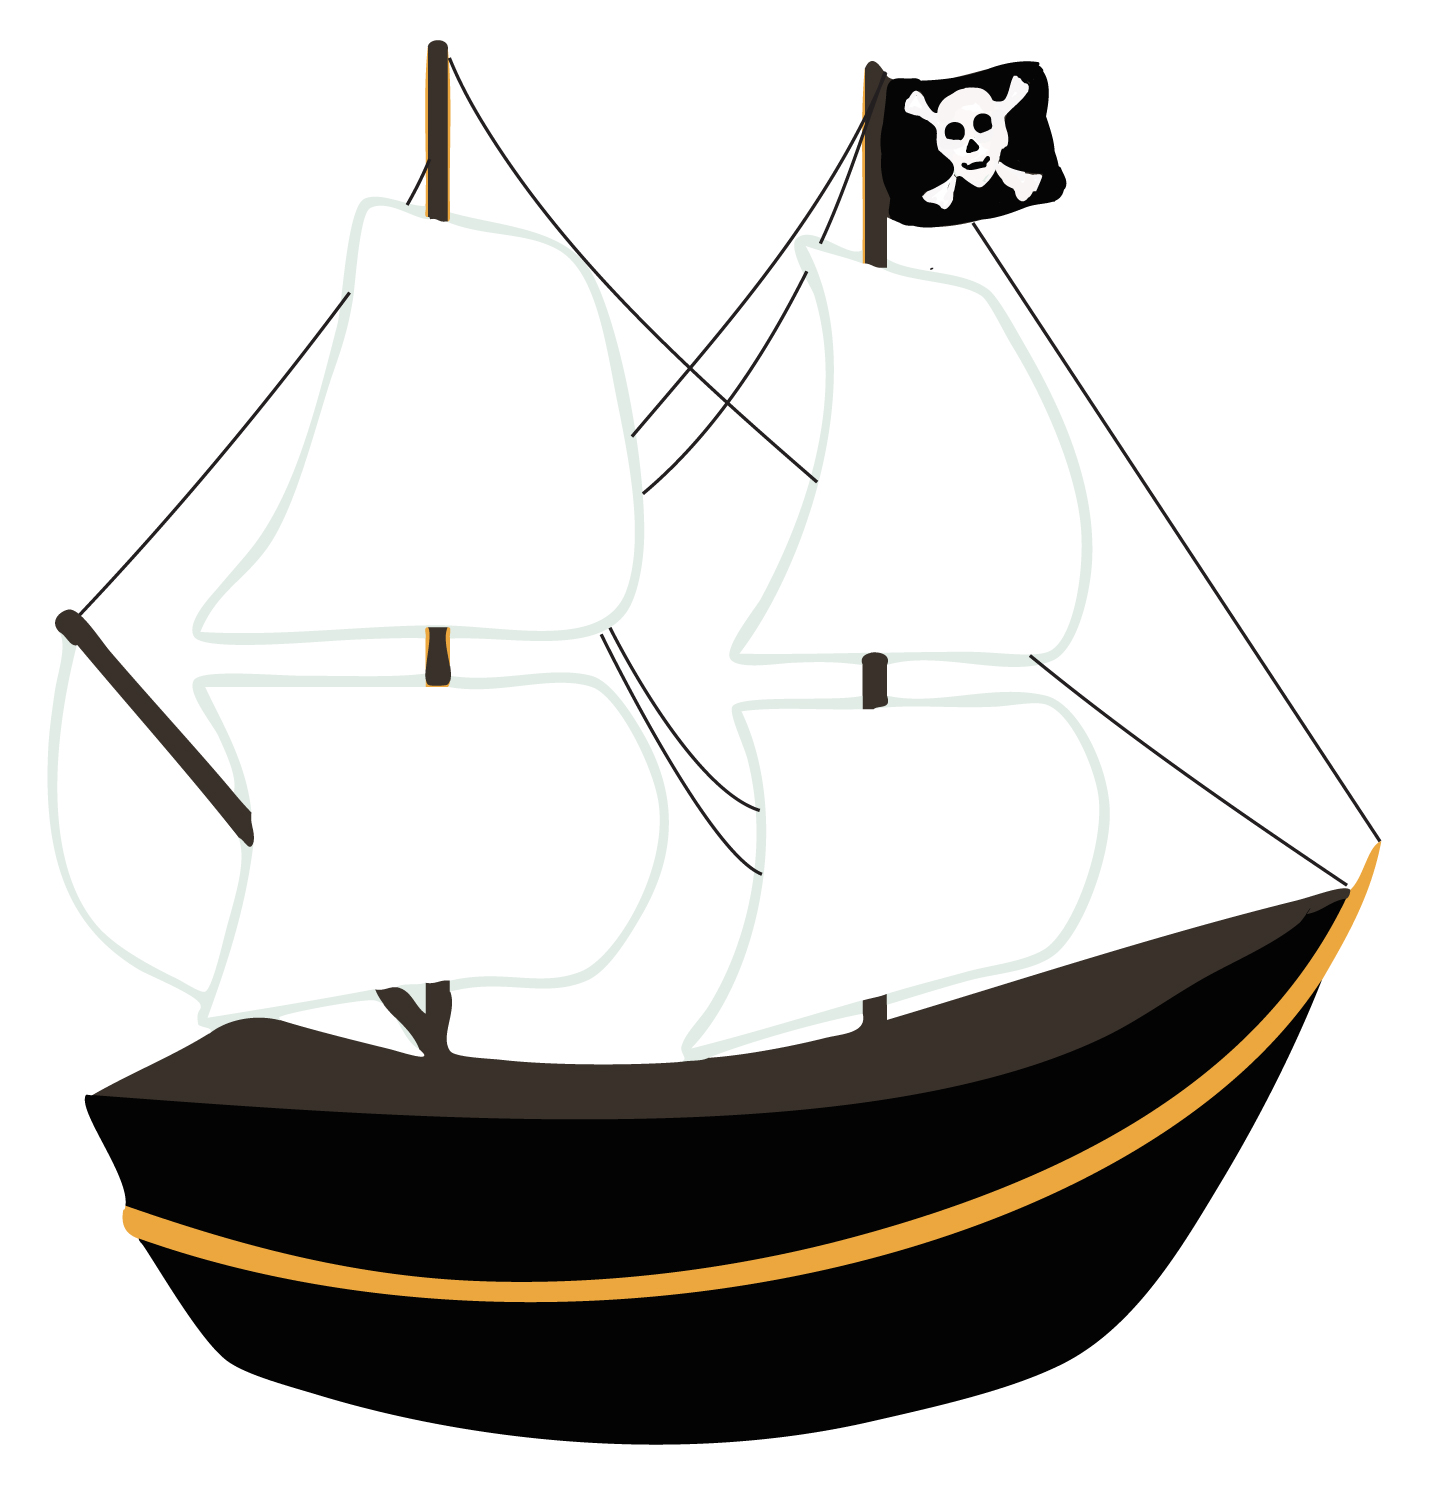 Early Learning Resources Pirate ship - Free Early Years and Primary ...